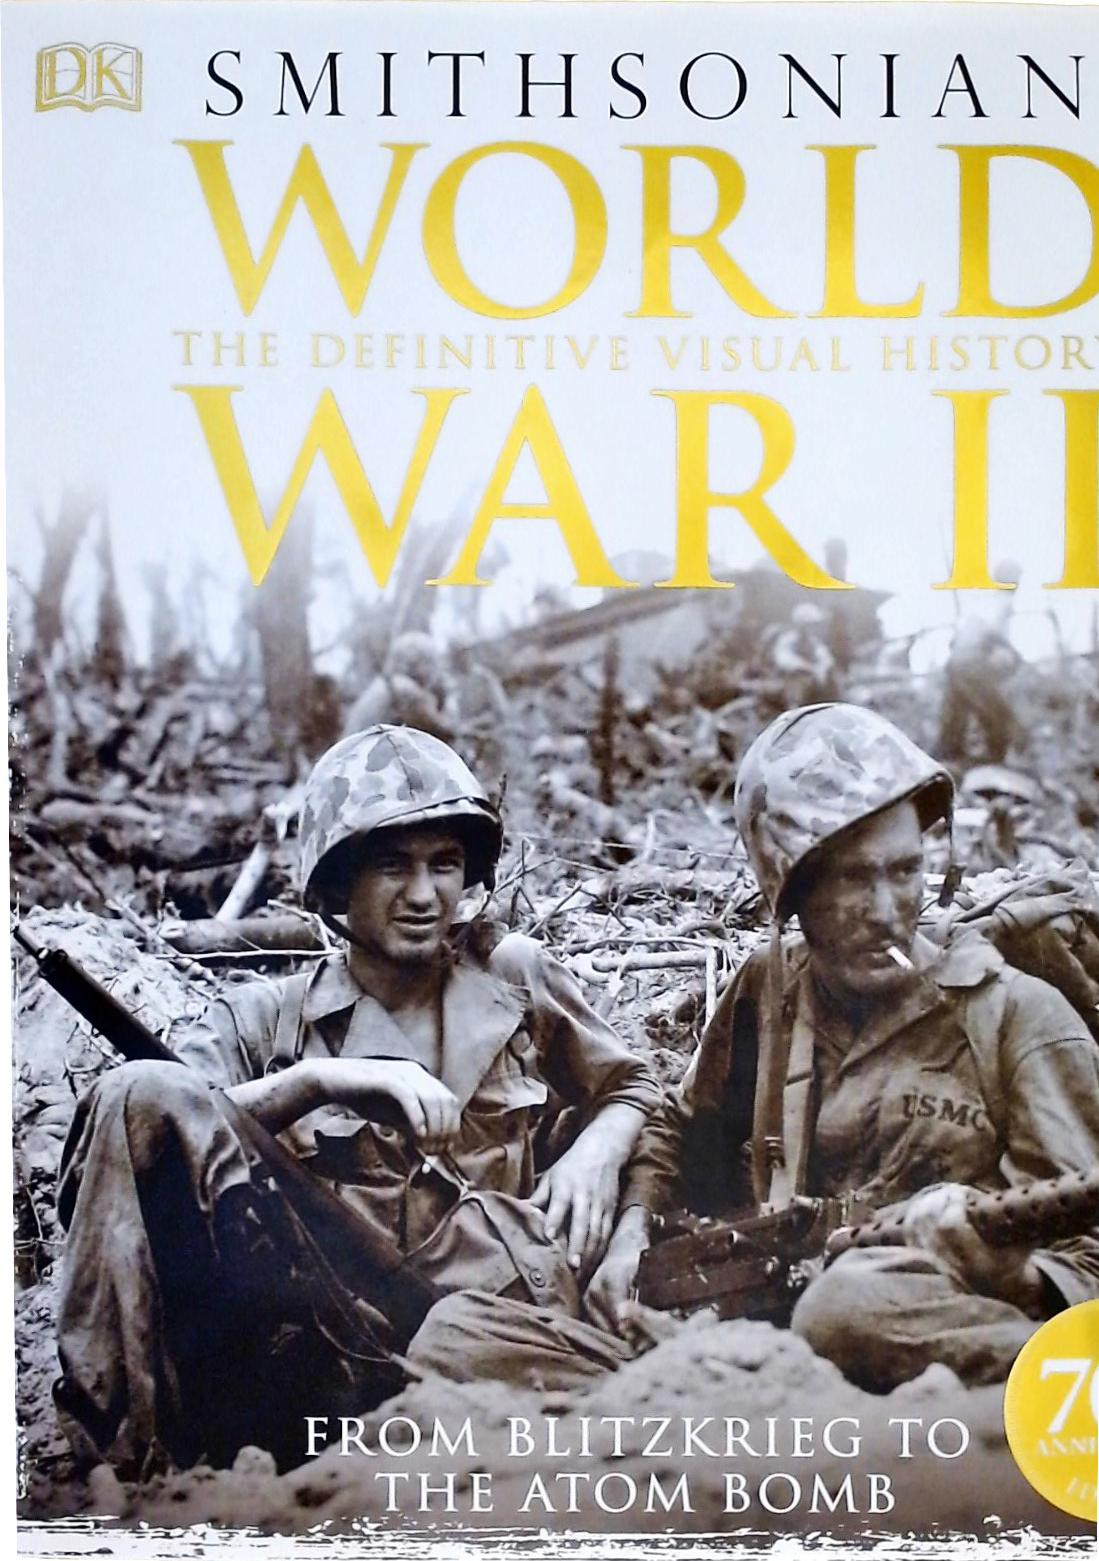 World War II - The Definitive Visual History From Blitzkrieg to the Atom Bomb